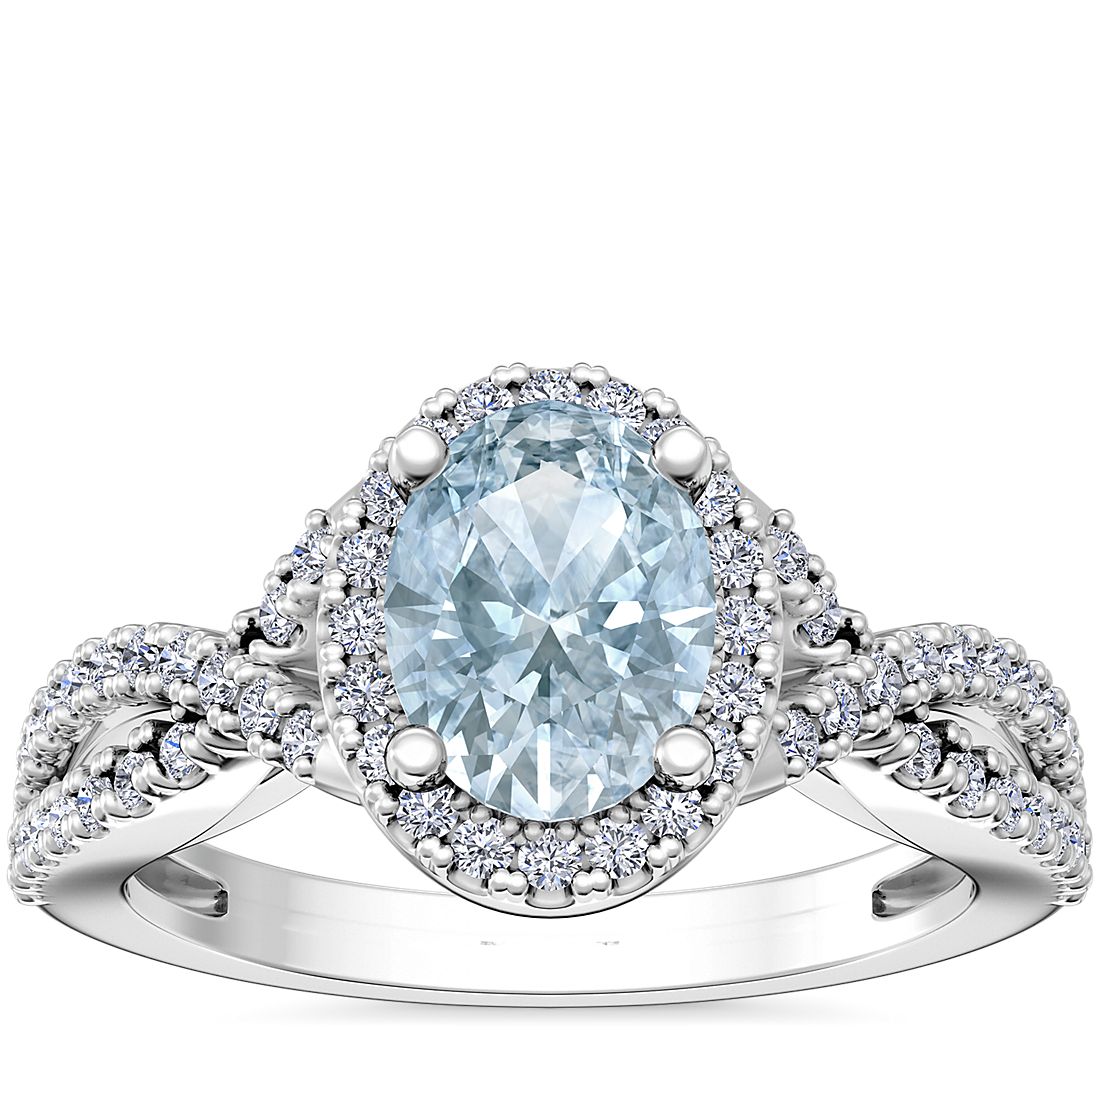 Twist Halo Diamond Engagement Ring with Oval Aquamarine in 14k White Gold (8x6mm)